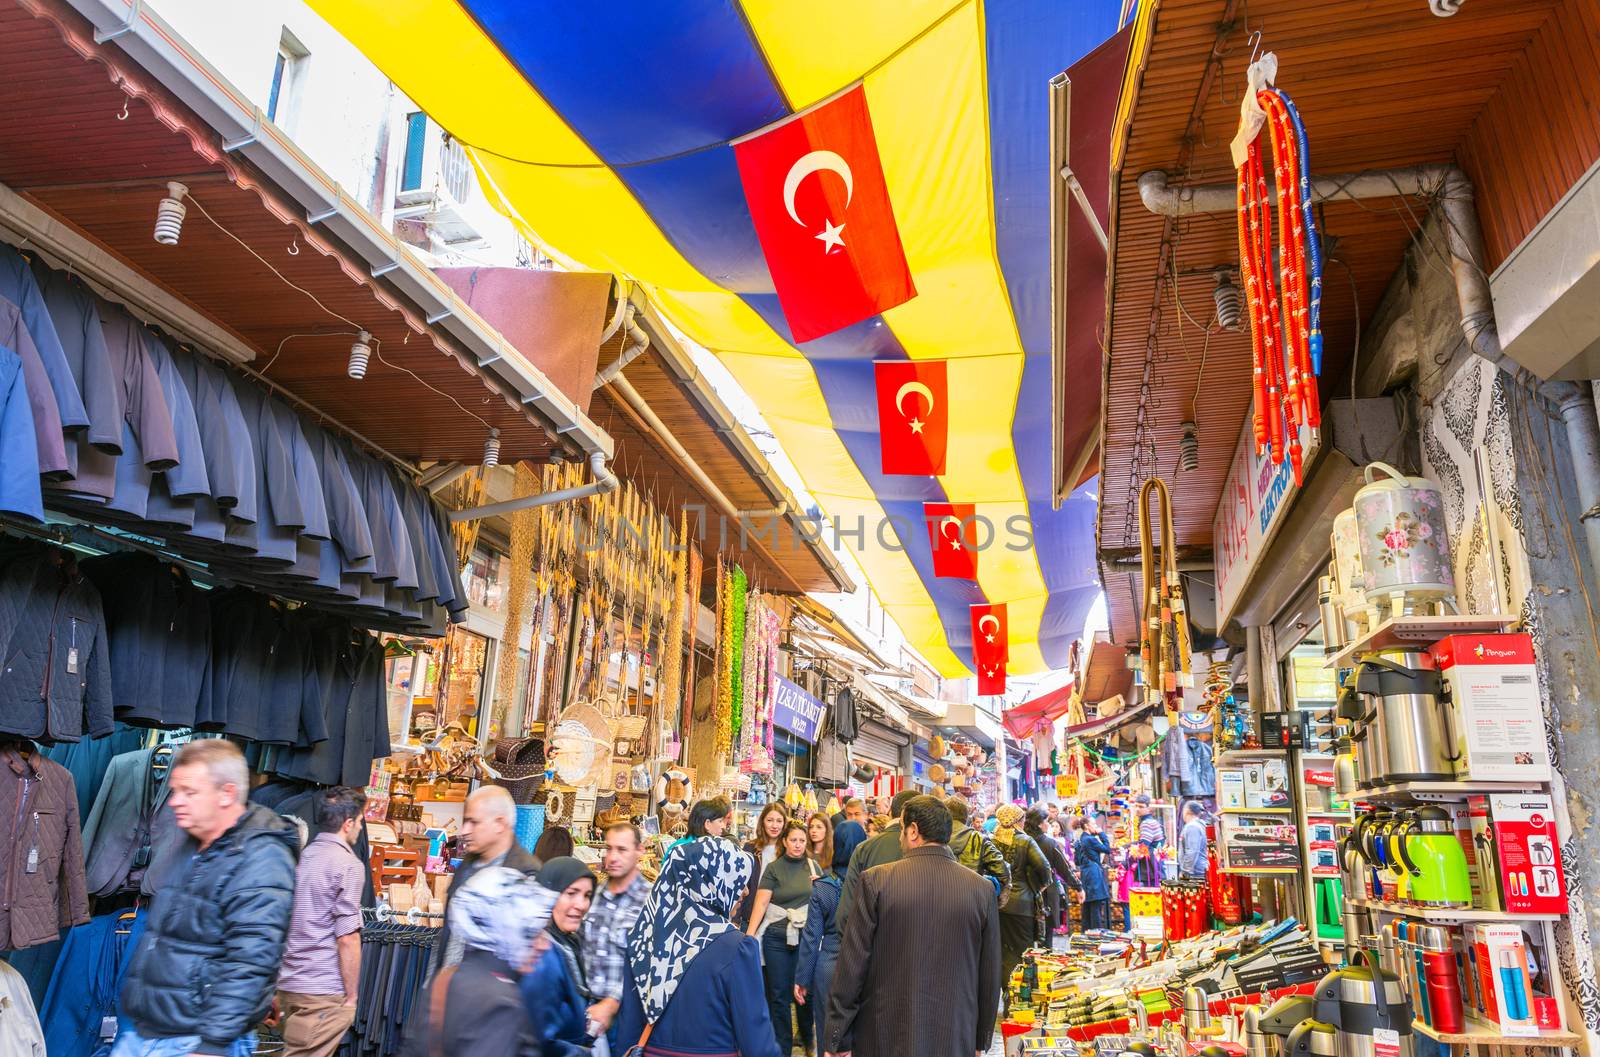 ISTANBUL, SEP 22: People shopping in the Grand Bazar in Istanbul, Turkey, one of the largest covered markets in the world, Istanbul, September 22, 2014.